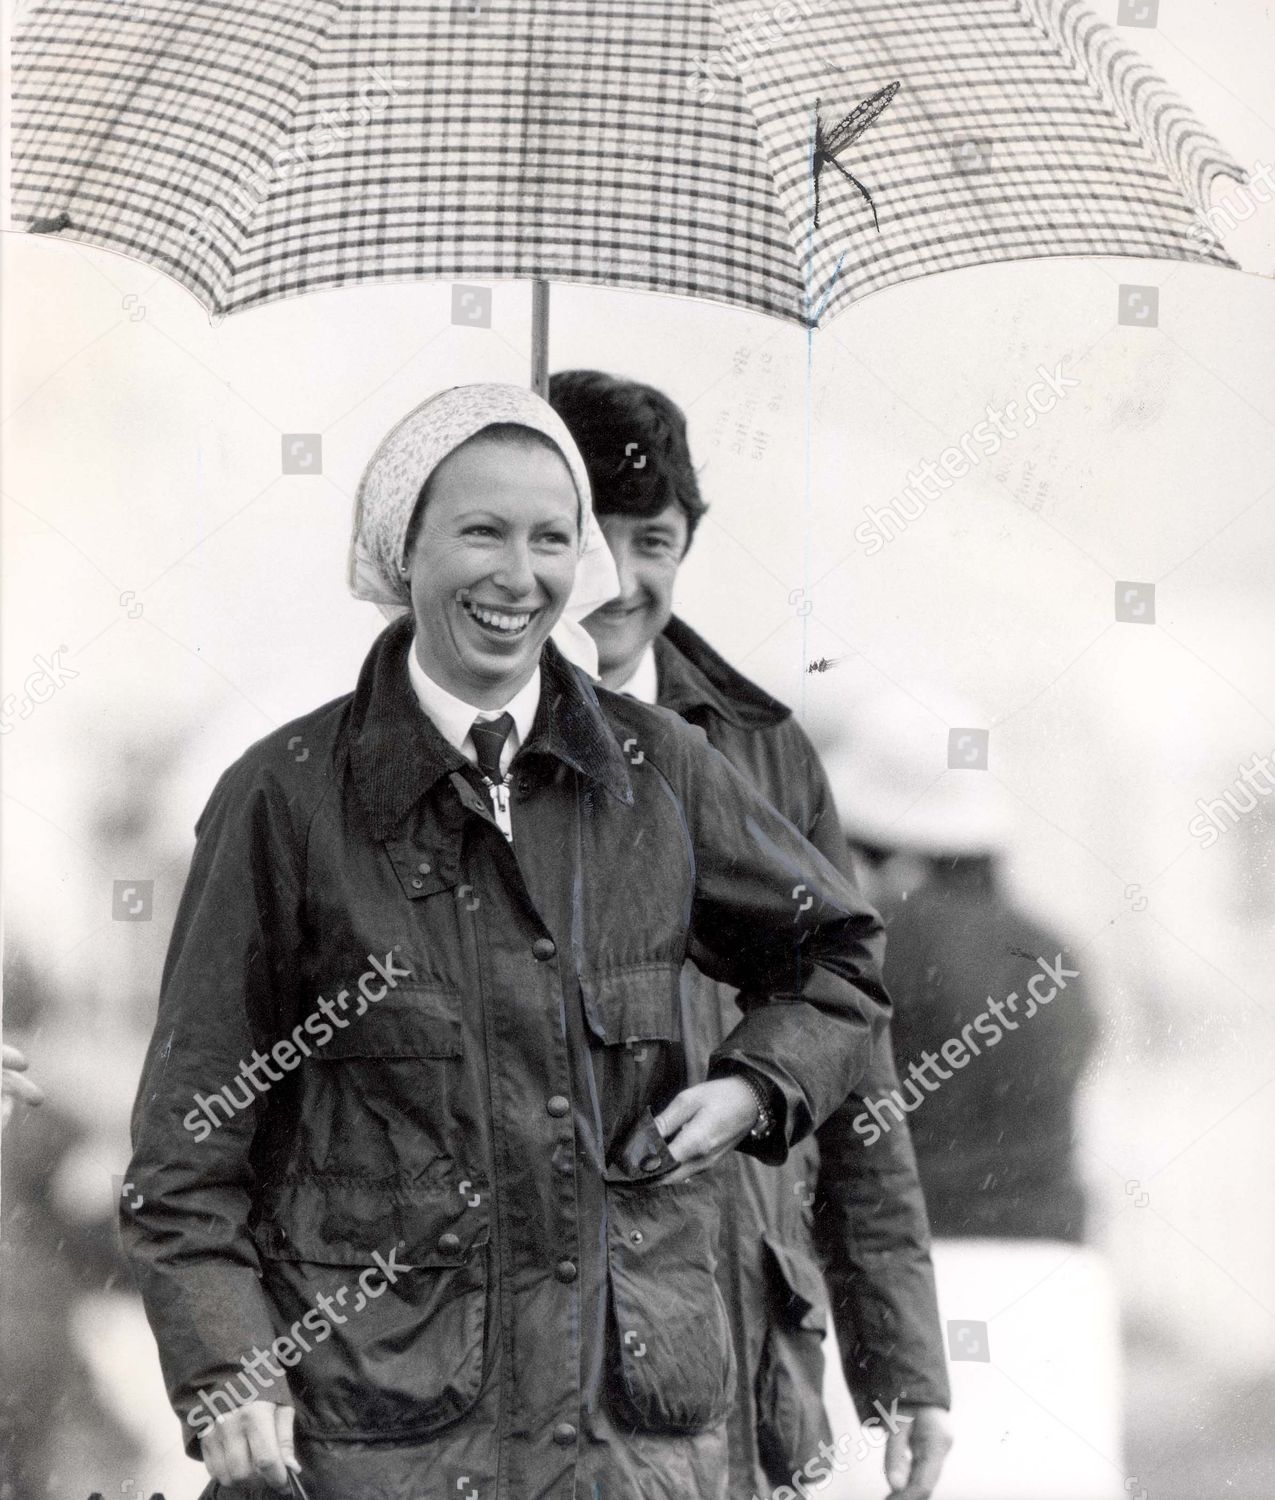 princess-anne-now-princess-royal-august-1985-heavy-rain-failed-to-dampen-the-enthusiasm-of-crowds-who-thronged-the-horse-trials-held-in-the-grounds-of-princess-anne-and-captain-mark-phillips-home-yesterday-prince-edward-and-former-champion-racing-shutterstock-editorial-930520a.jpg